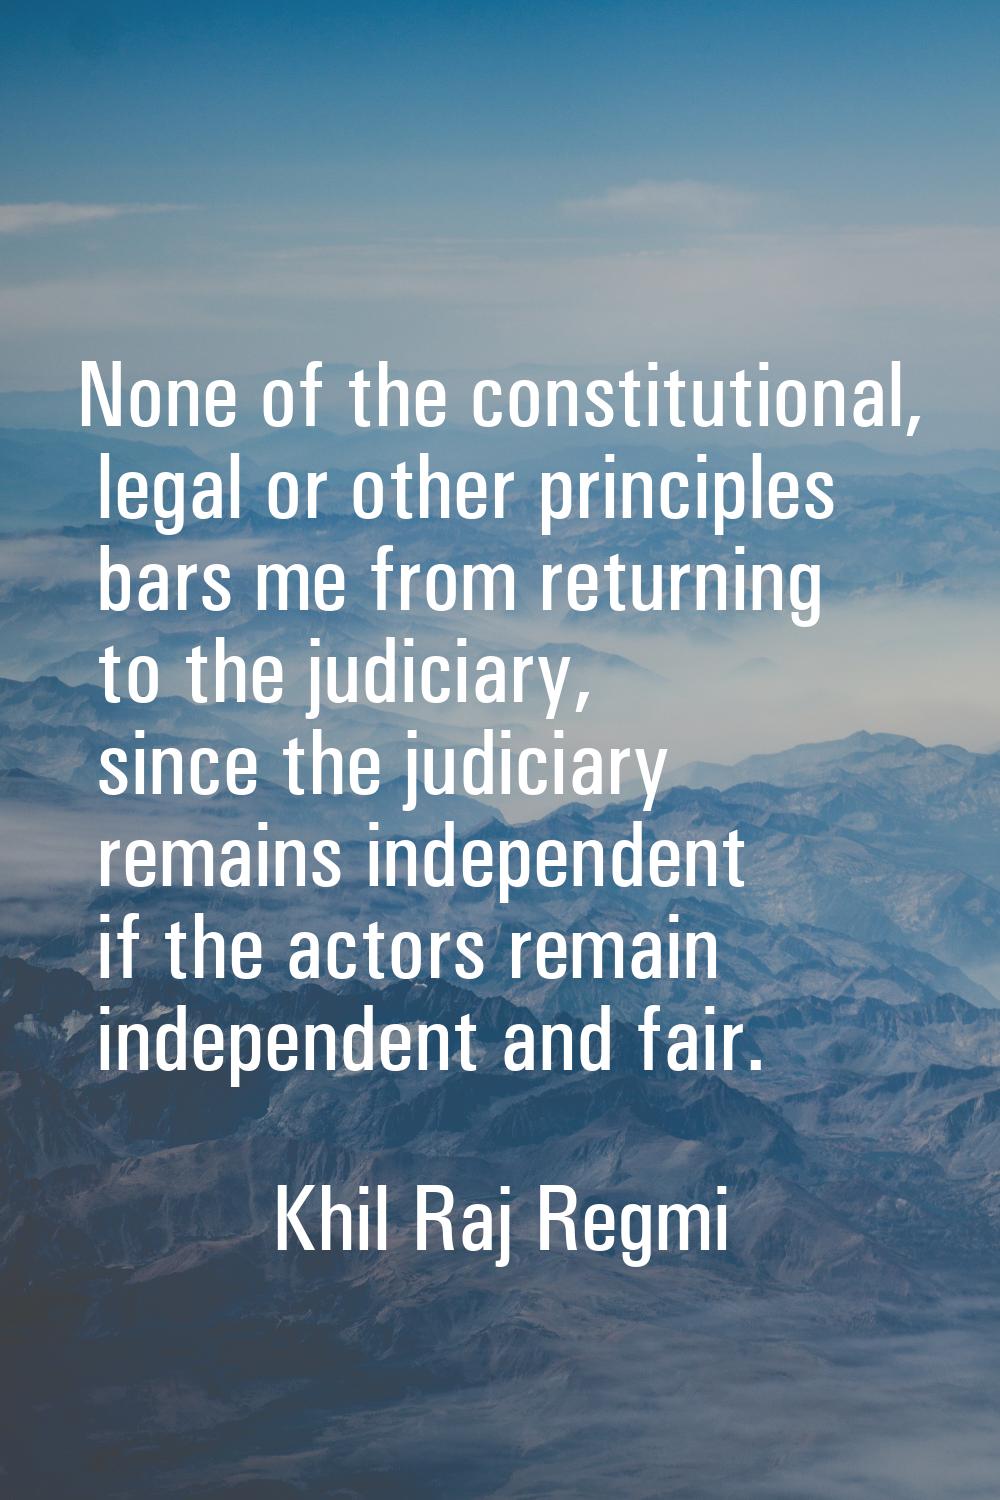 None of the constitutional, legal or other principles bars me from returning to the judiciary, sinc